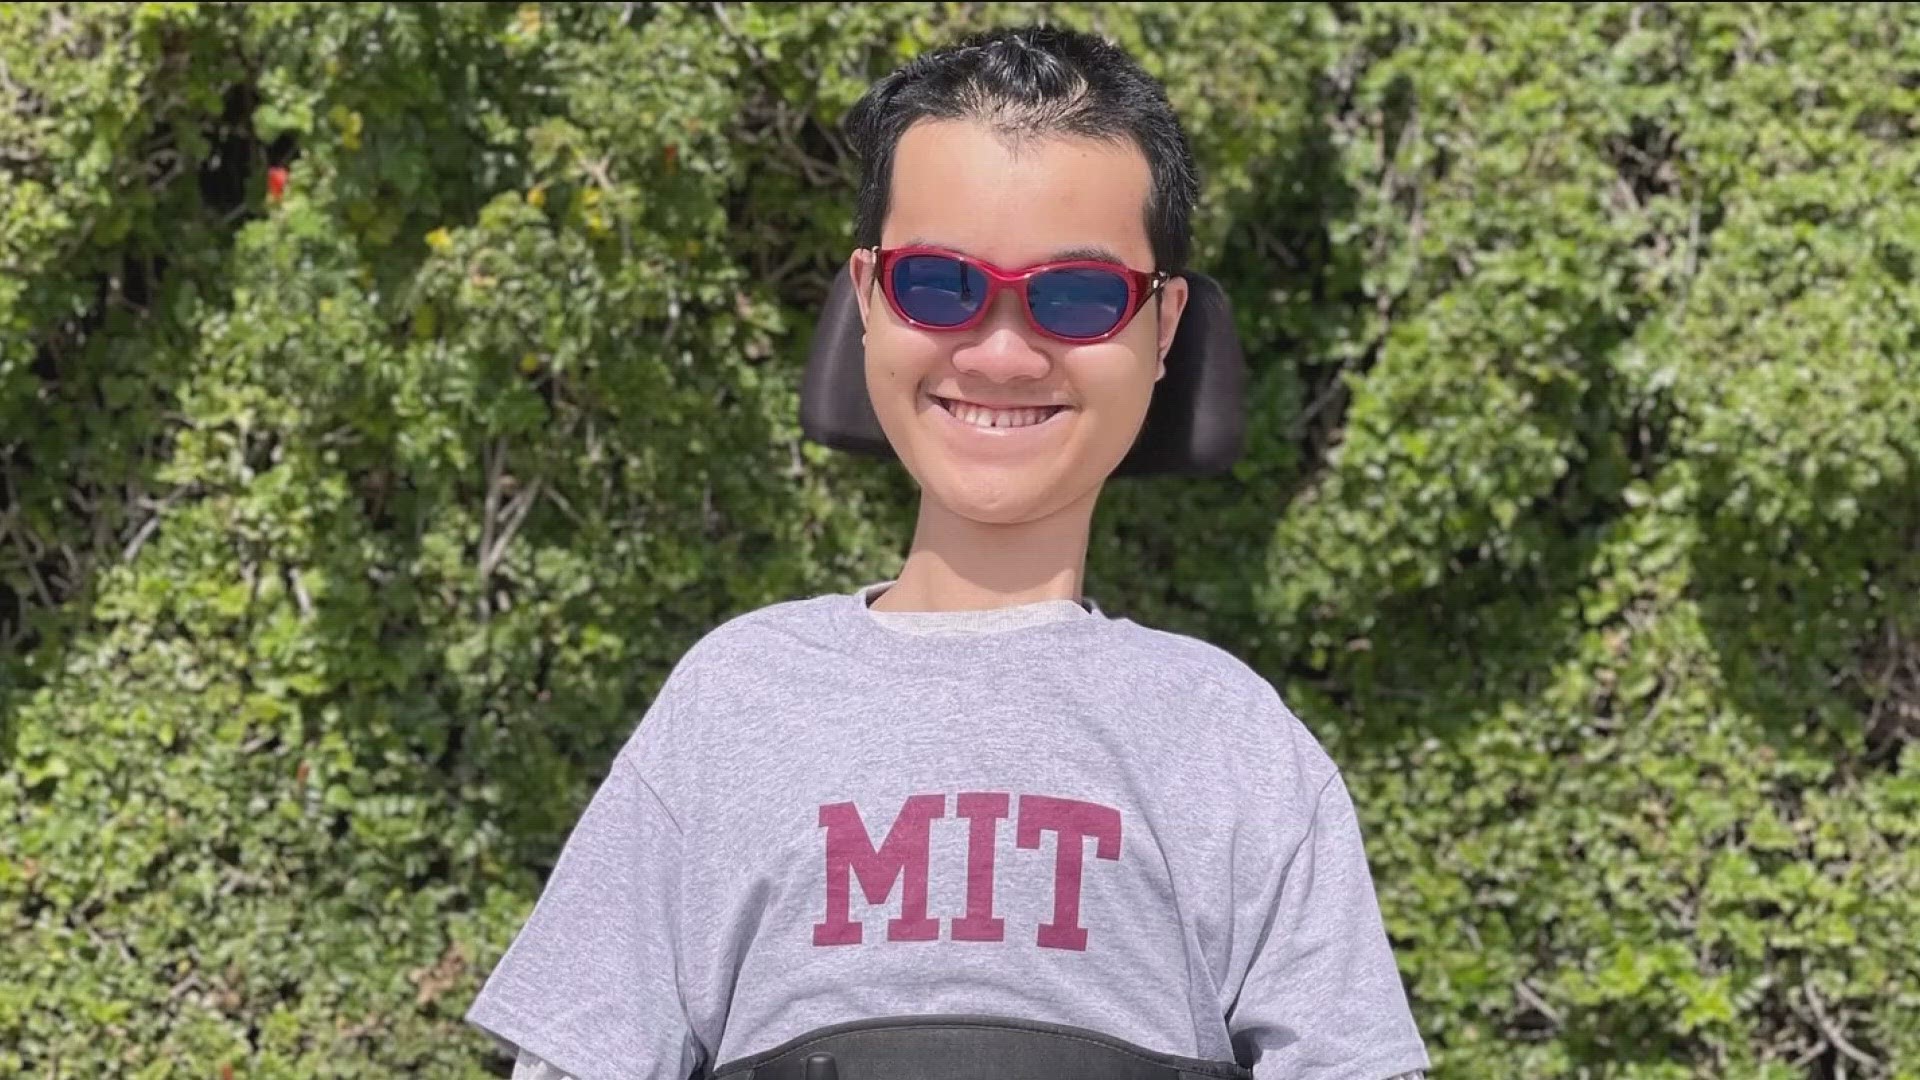 Ben has a perfect 5.0 GPA at MIT despite health challenges from Spinal Muscular Atrophy.